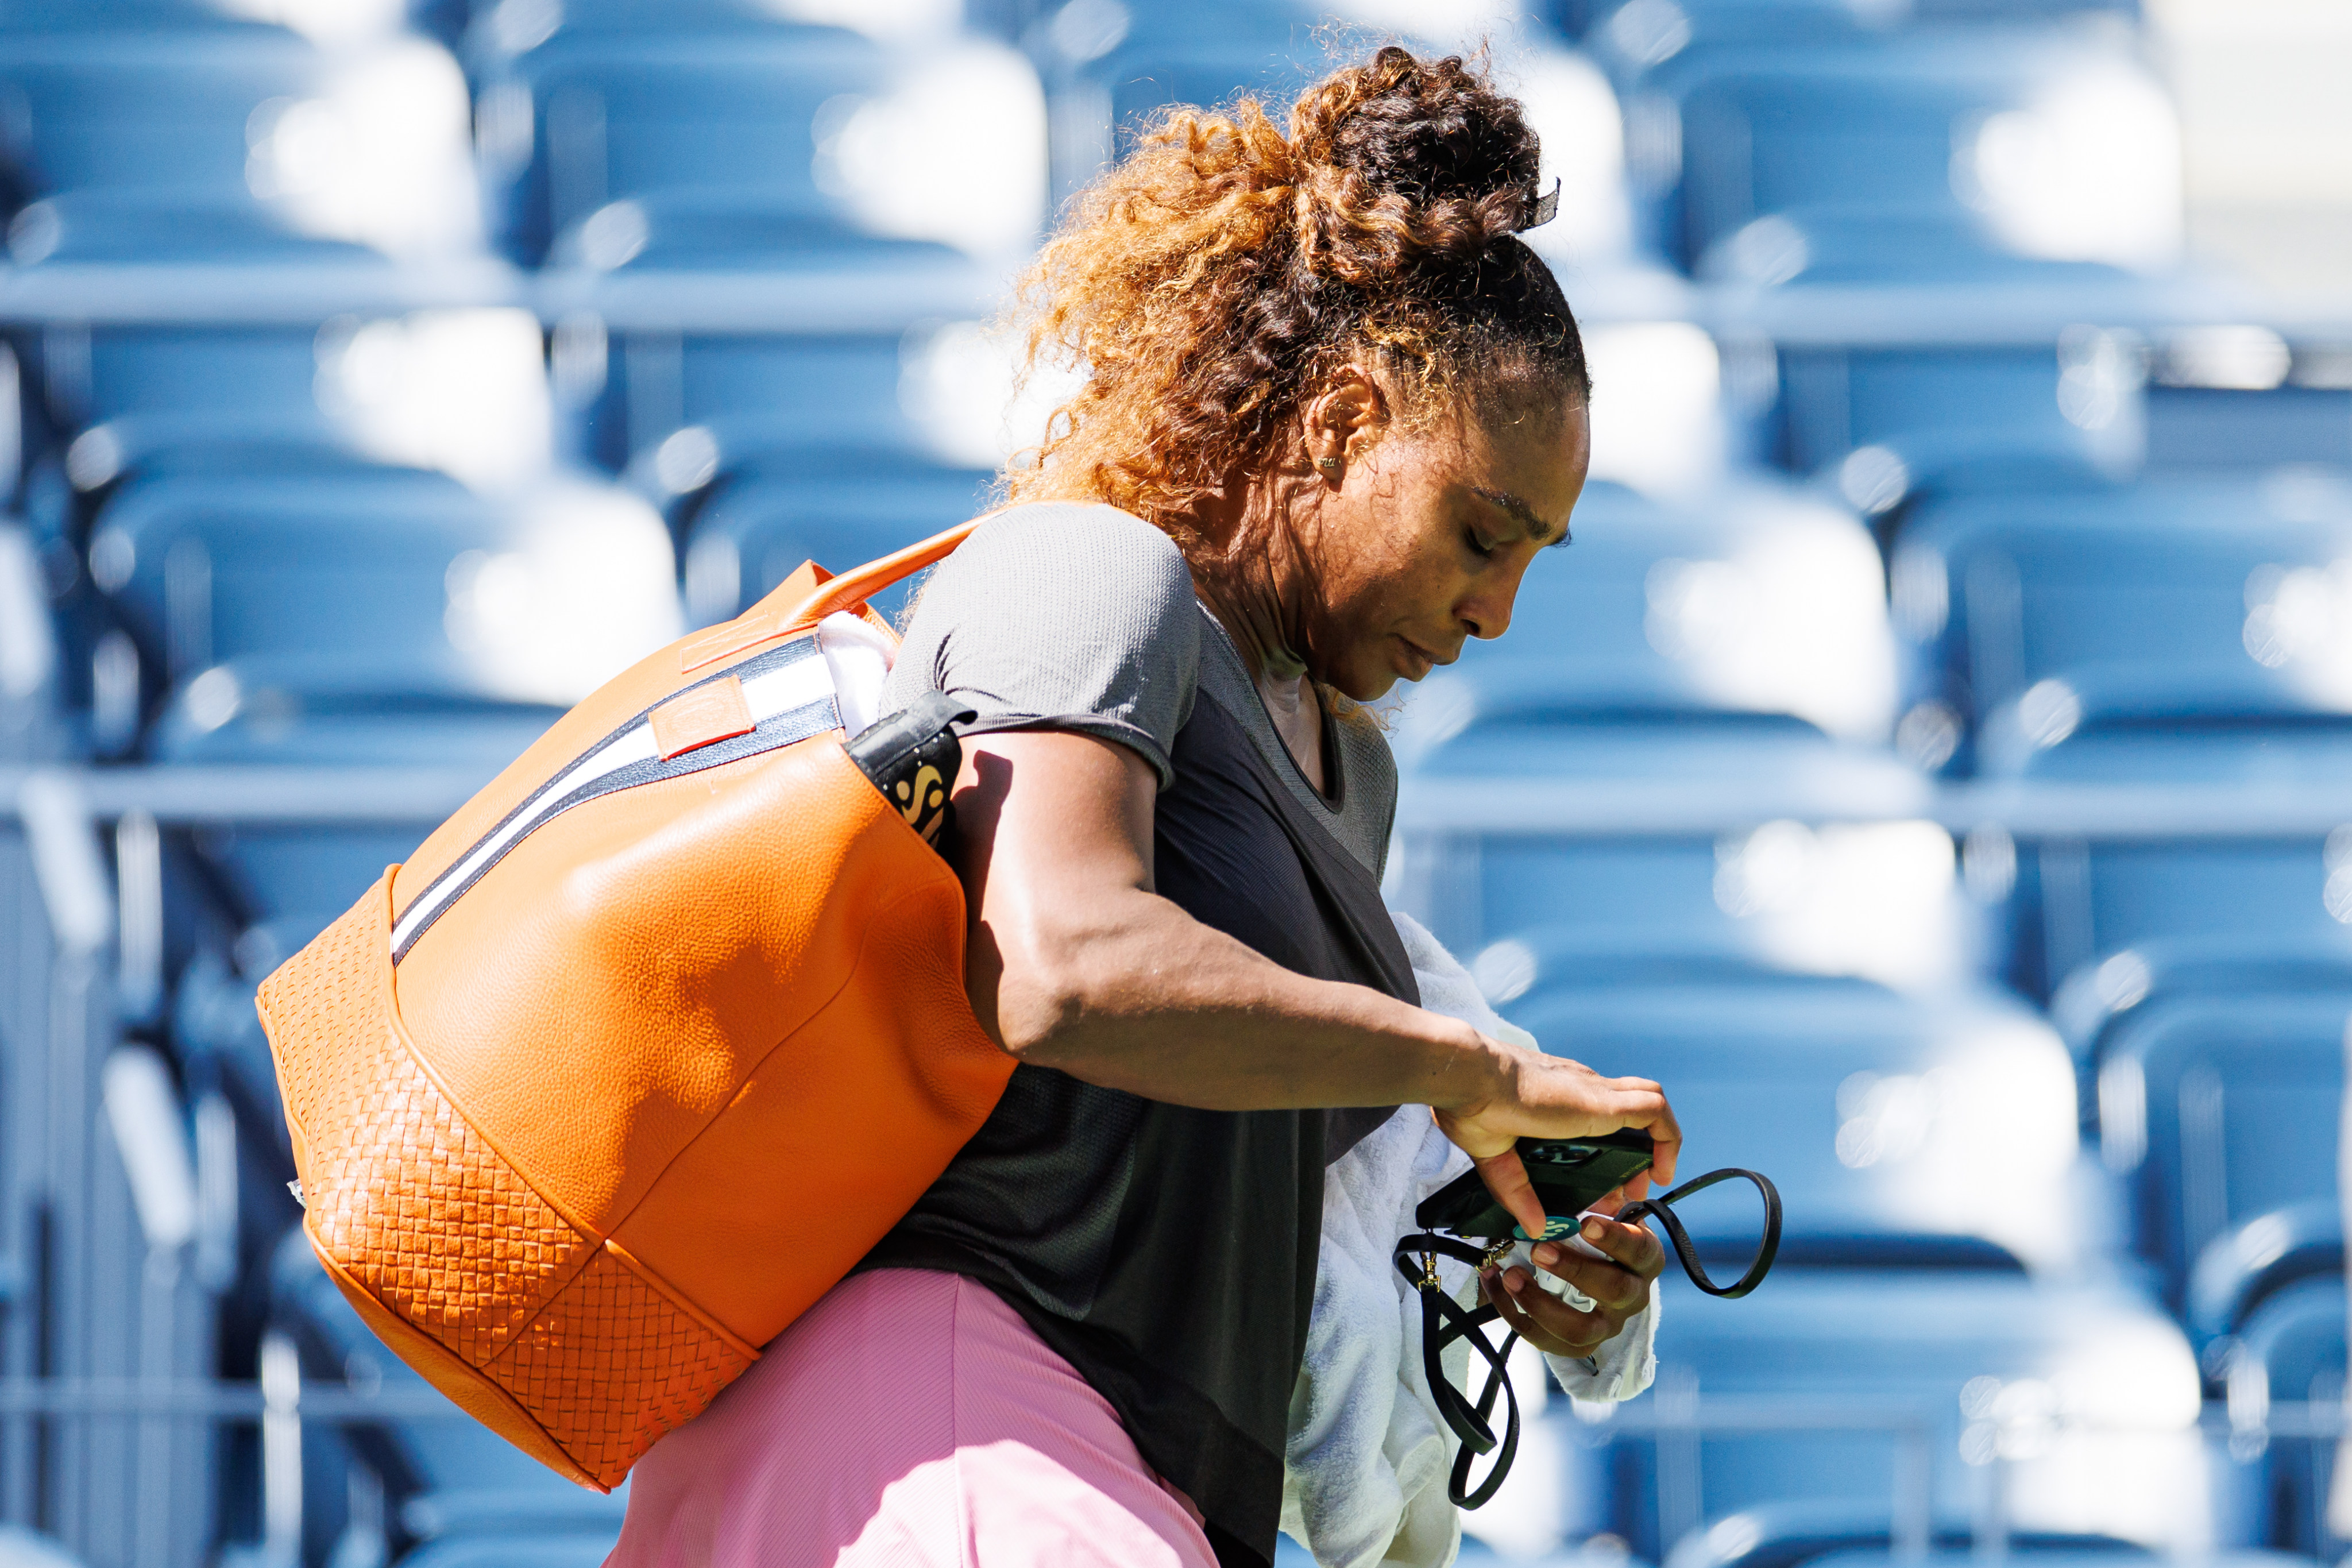 Women’s tennis legend Serena Williams turned heads at what may be her last US Open with a giant orange Niccolo bag from Italy-inspired designer Kimberly Pucci. Photo: TPN/Getty Images